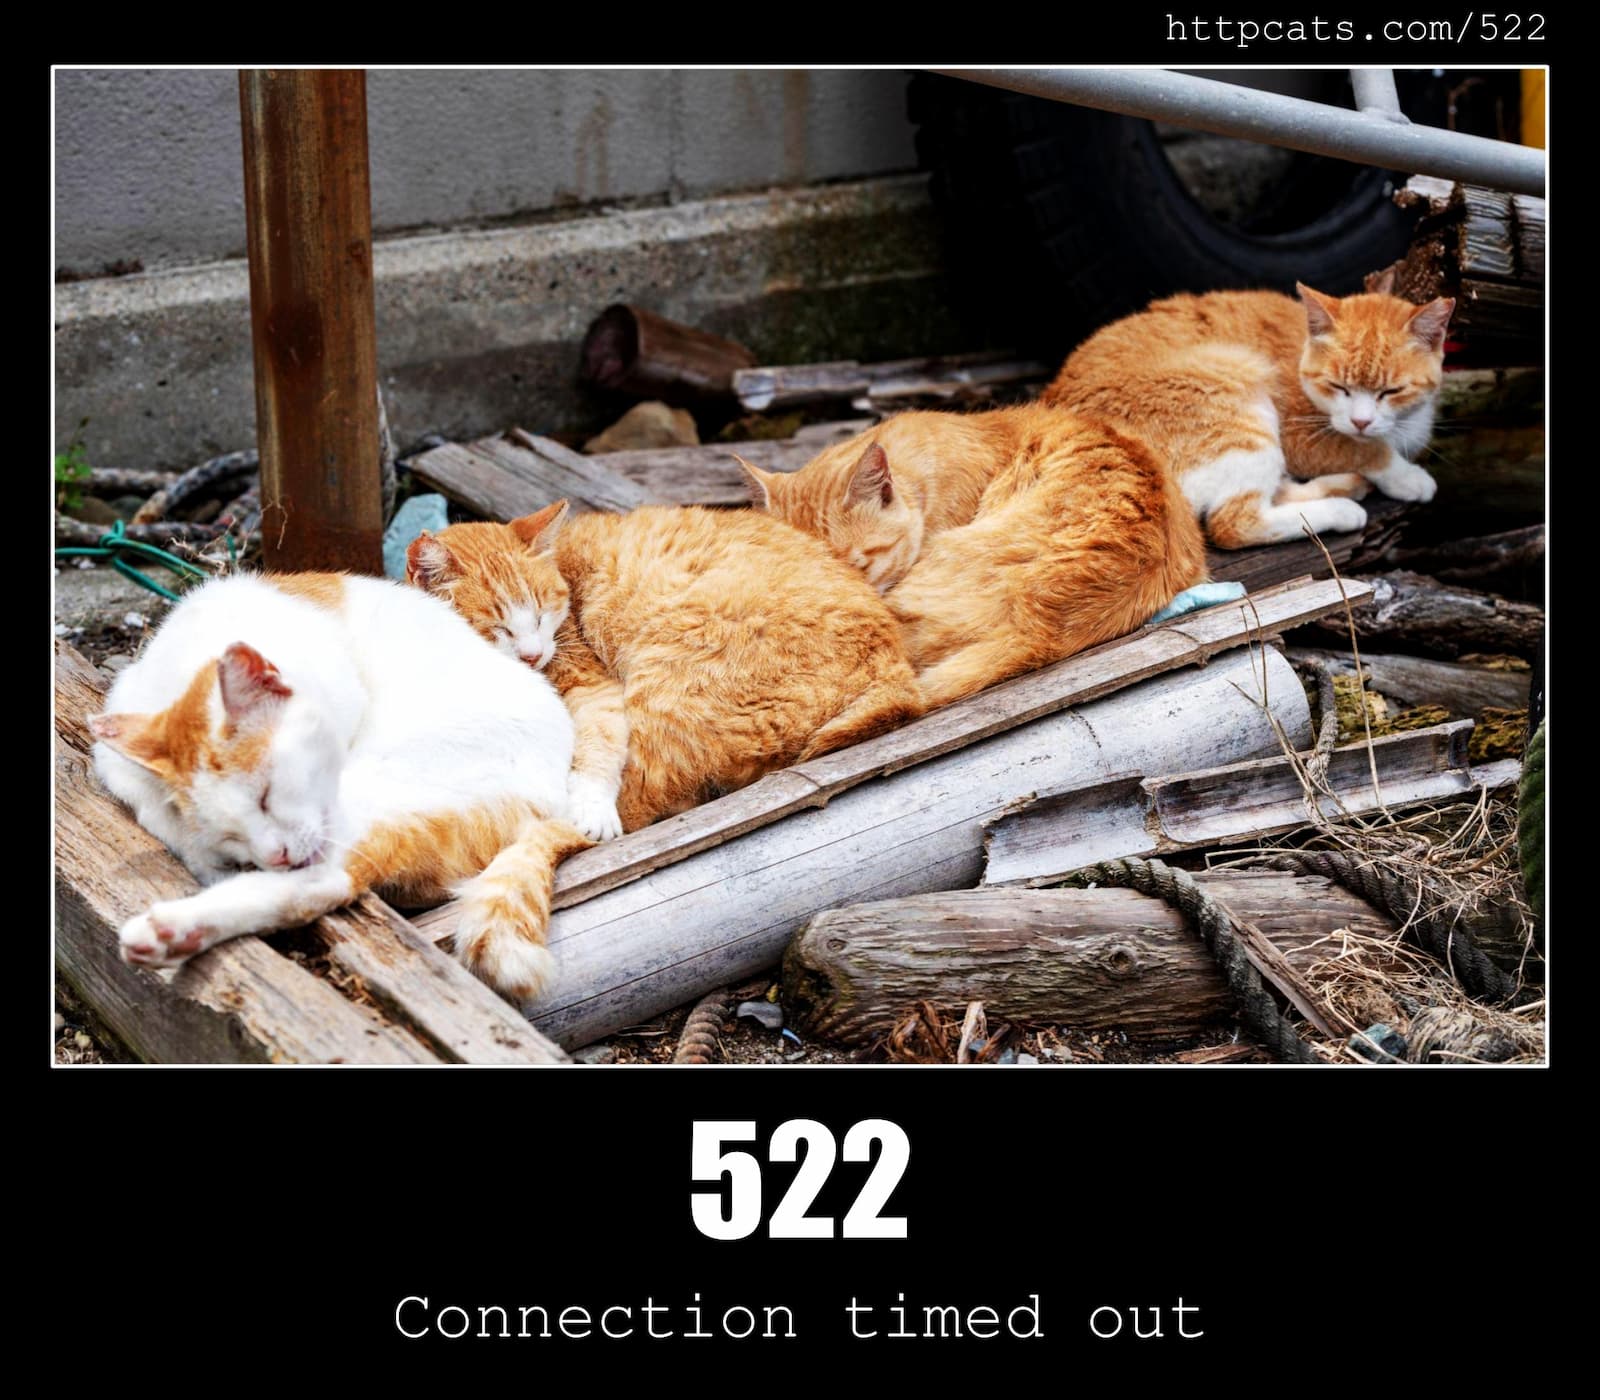 HTTP Status Code 522 Connection timed out & Cats